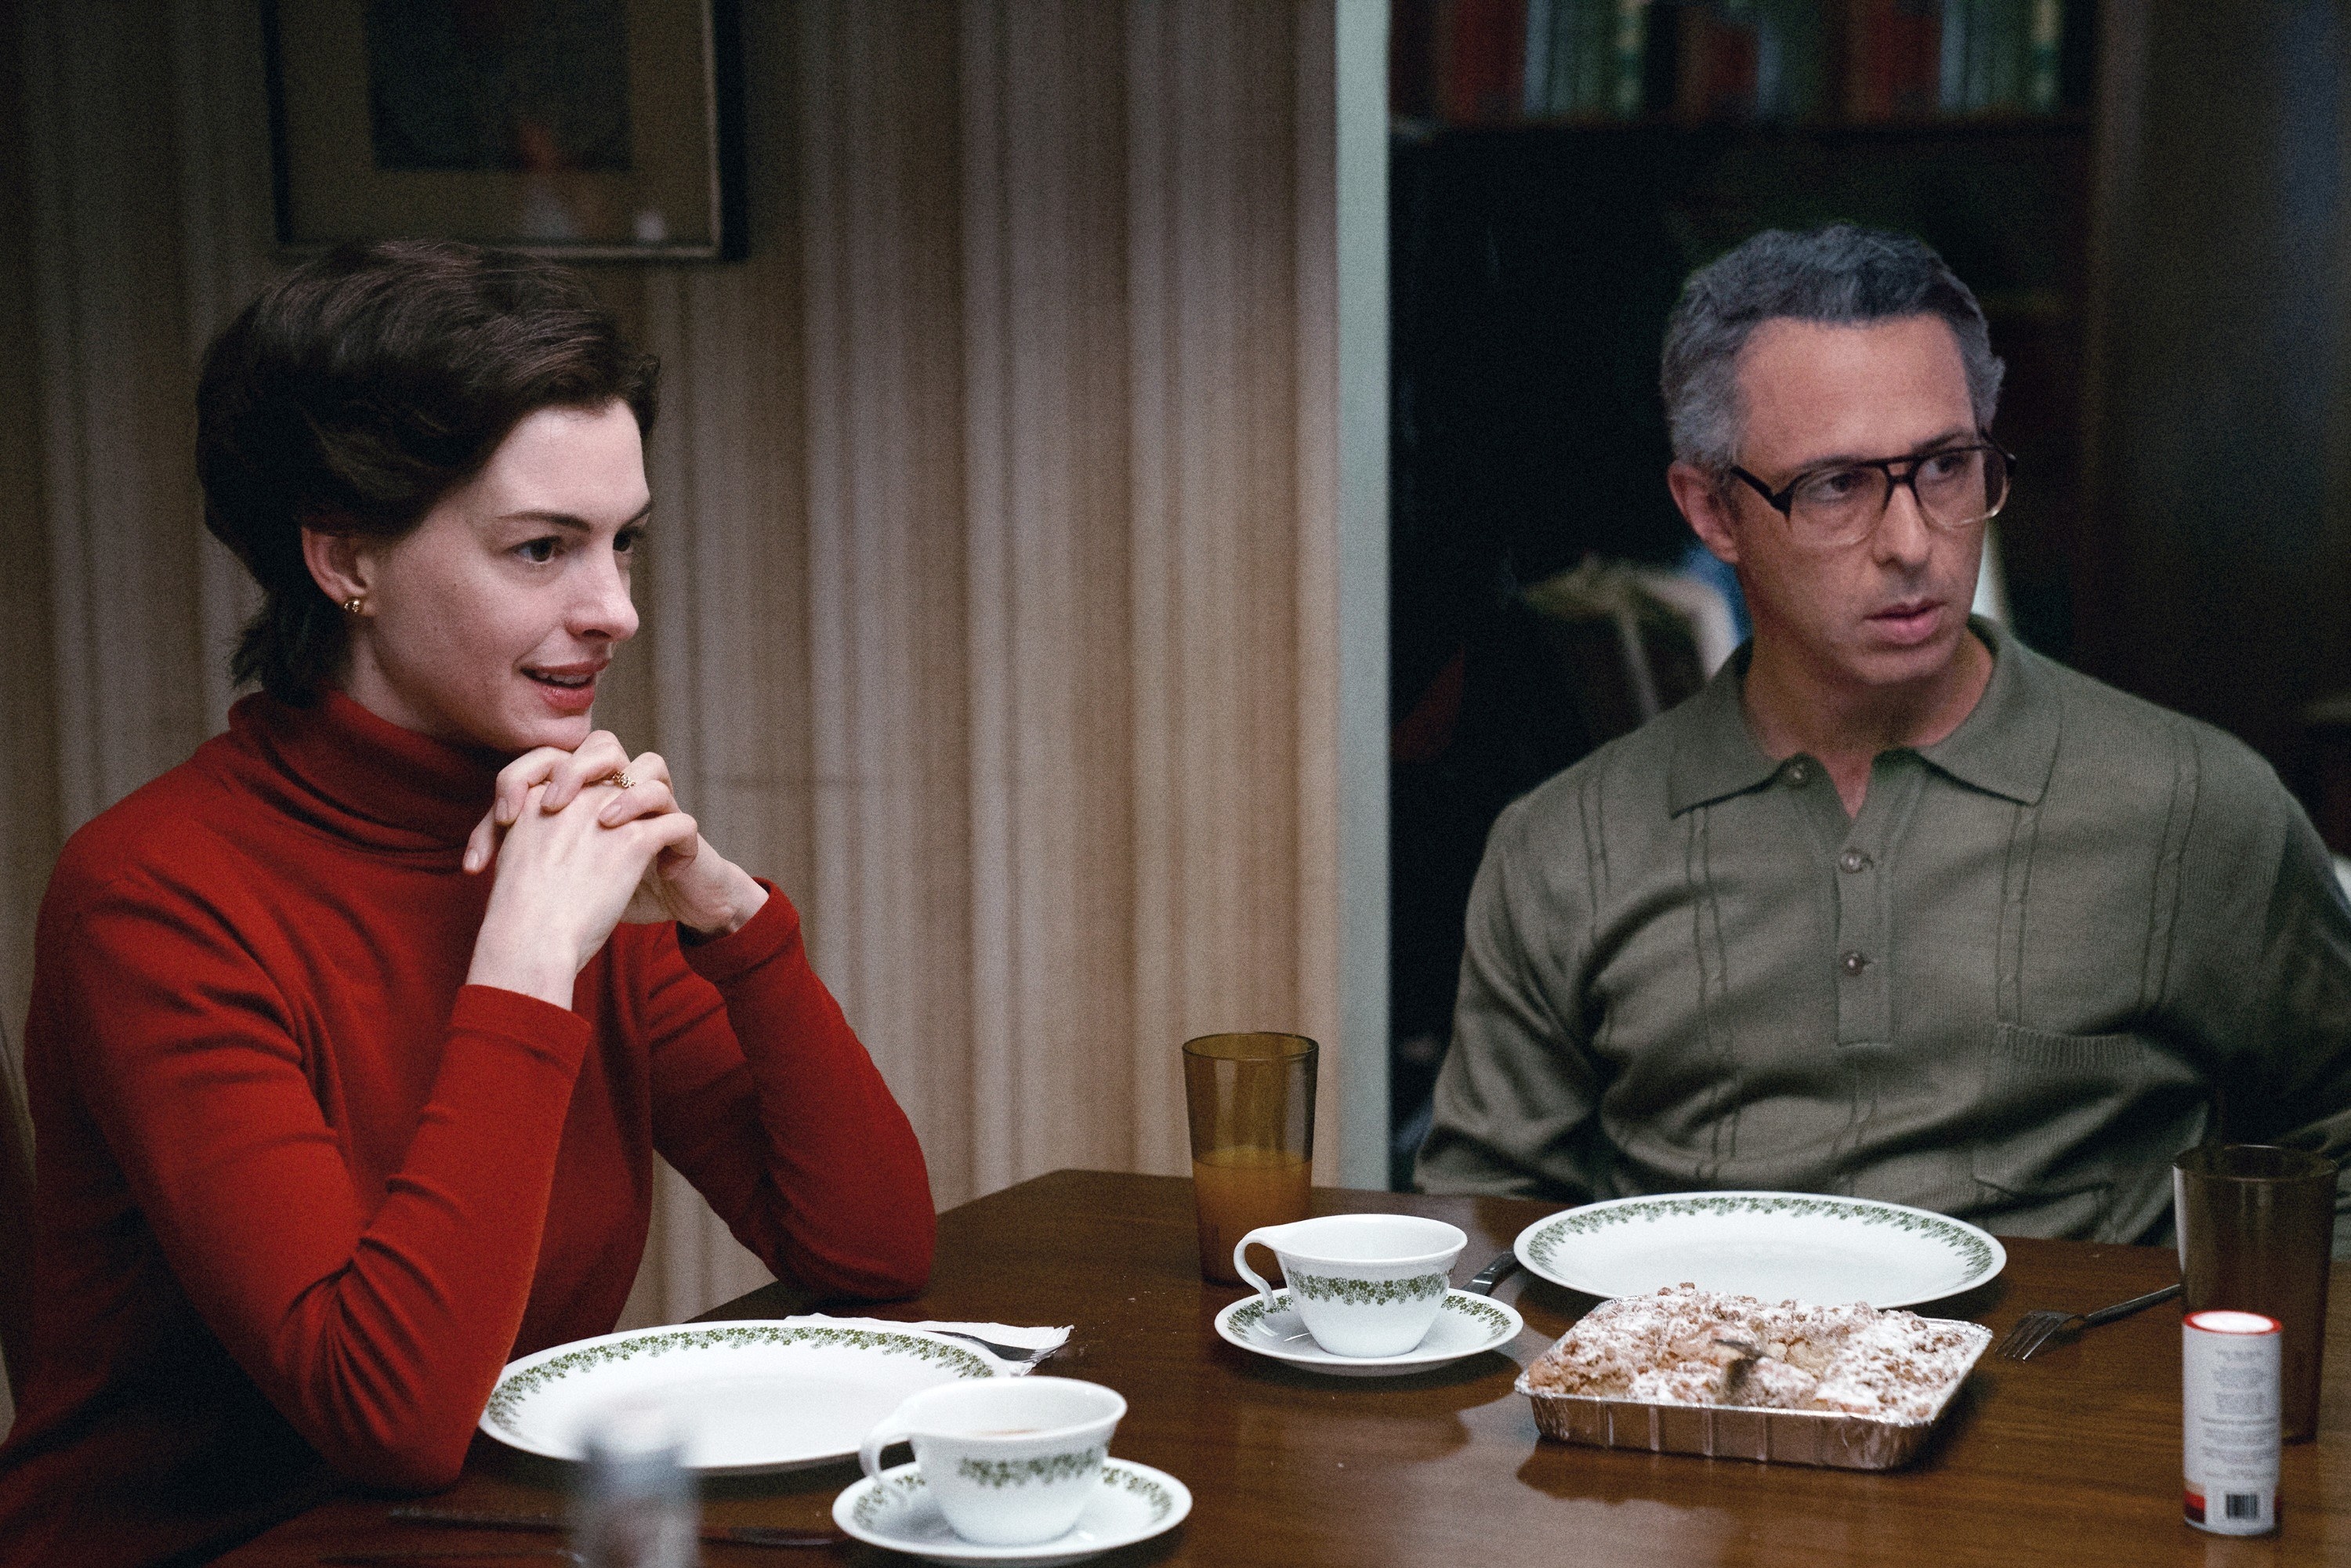 Anne Hathaway and Jeremy Strong sit at a dinner table